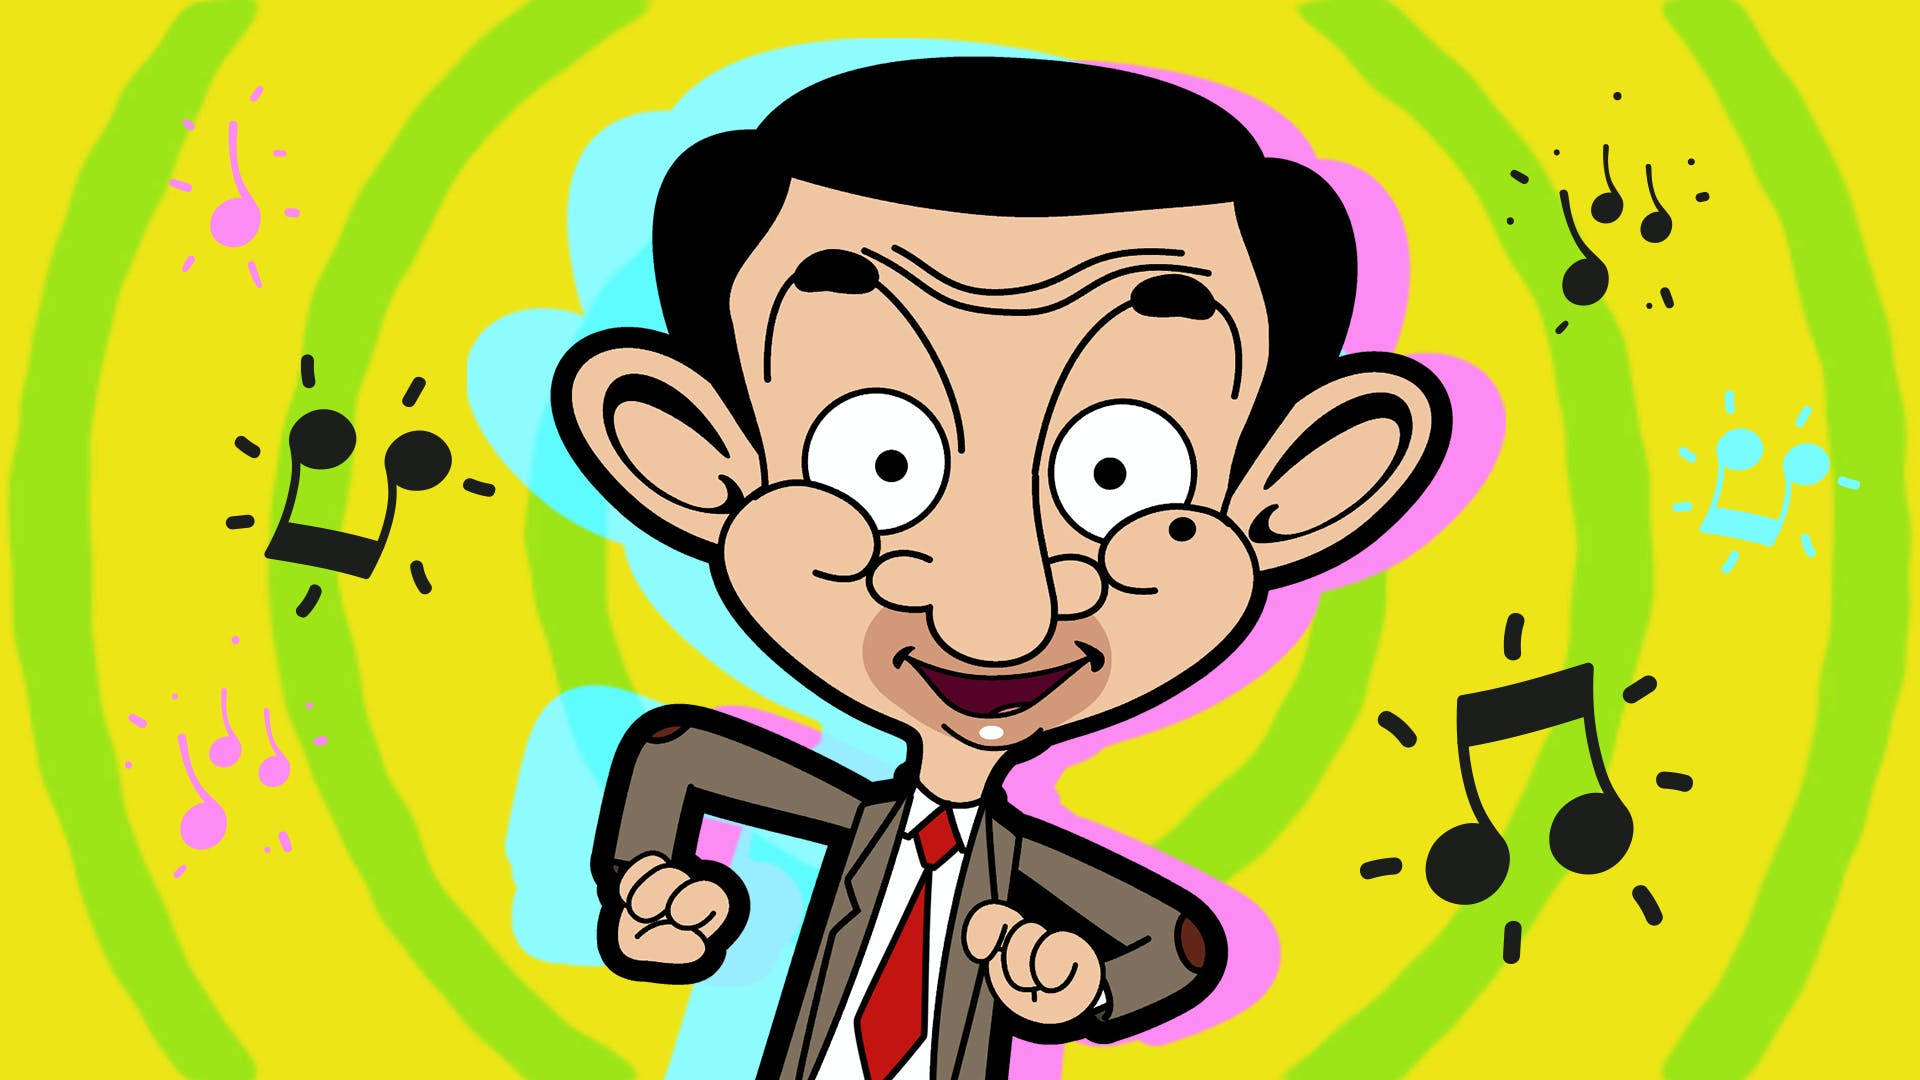 Free Mr Bean Cartoon Pictures , [100+] Mr Bean Cartoon Pictures for FREE |  